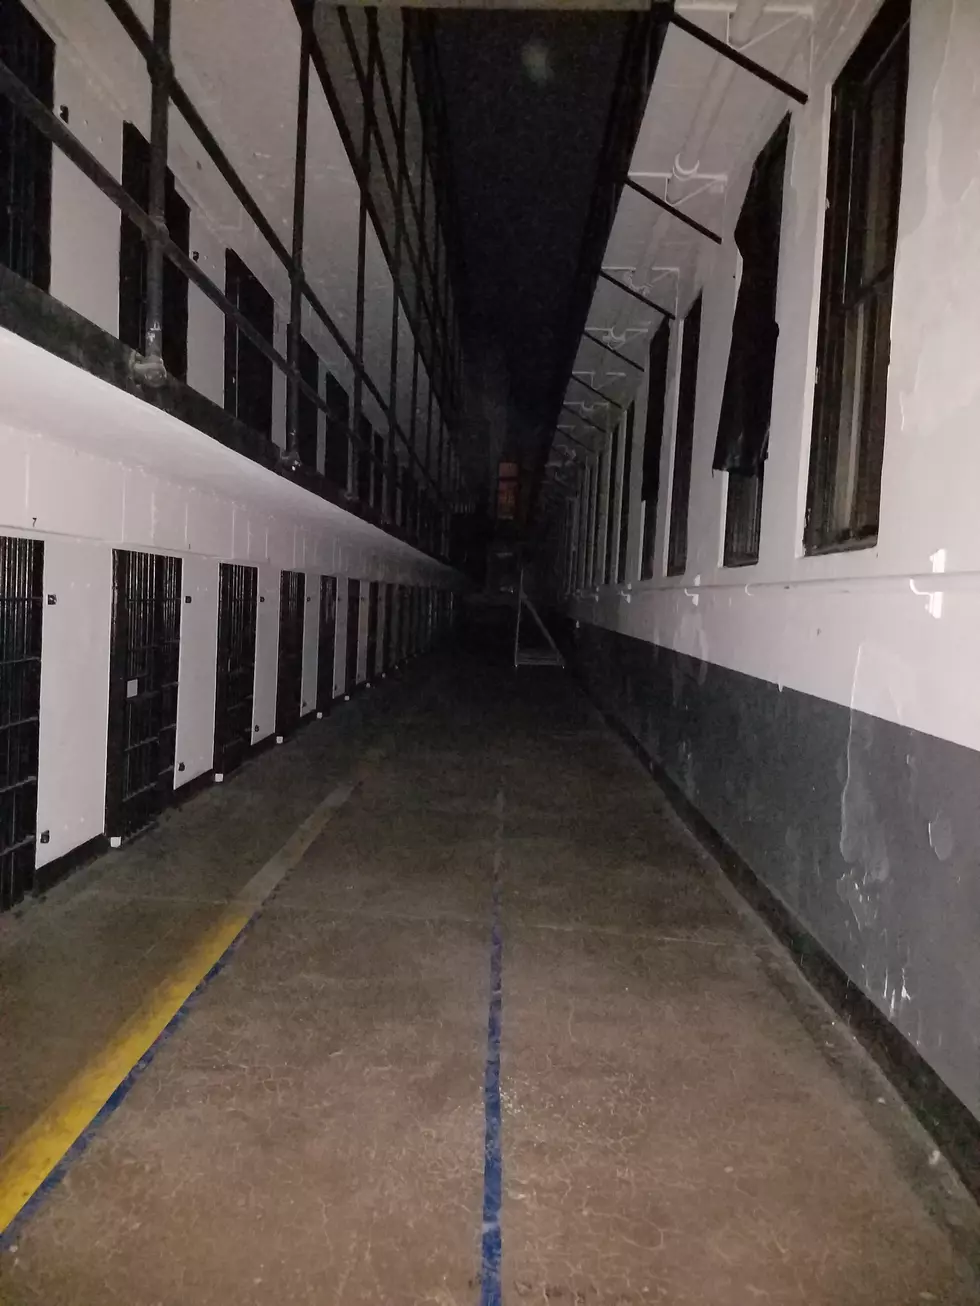 Be Part of the 2020 Blaze Ghost Hunt Team at Old MT State Prison